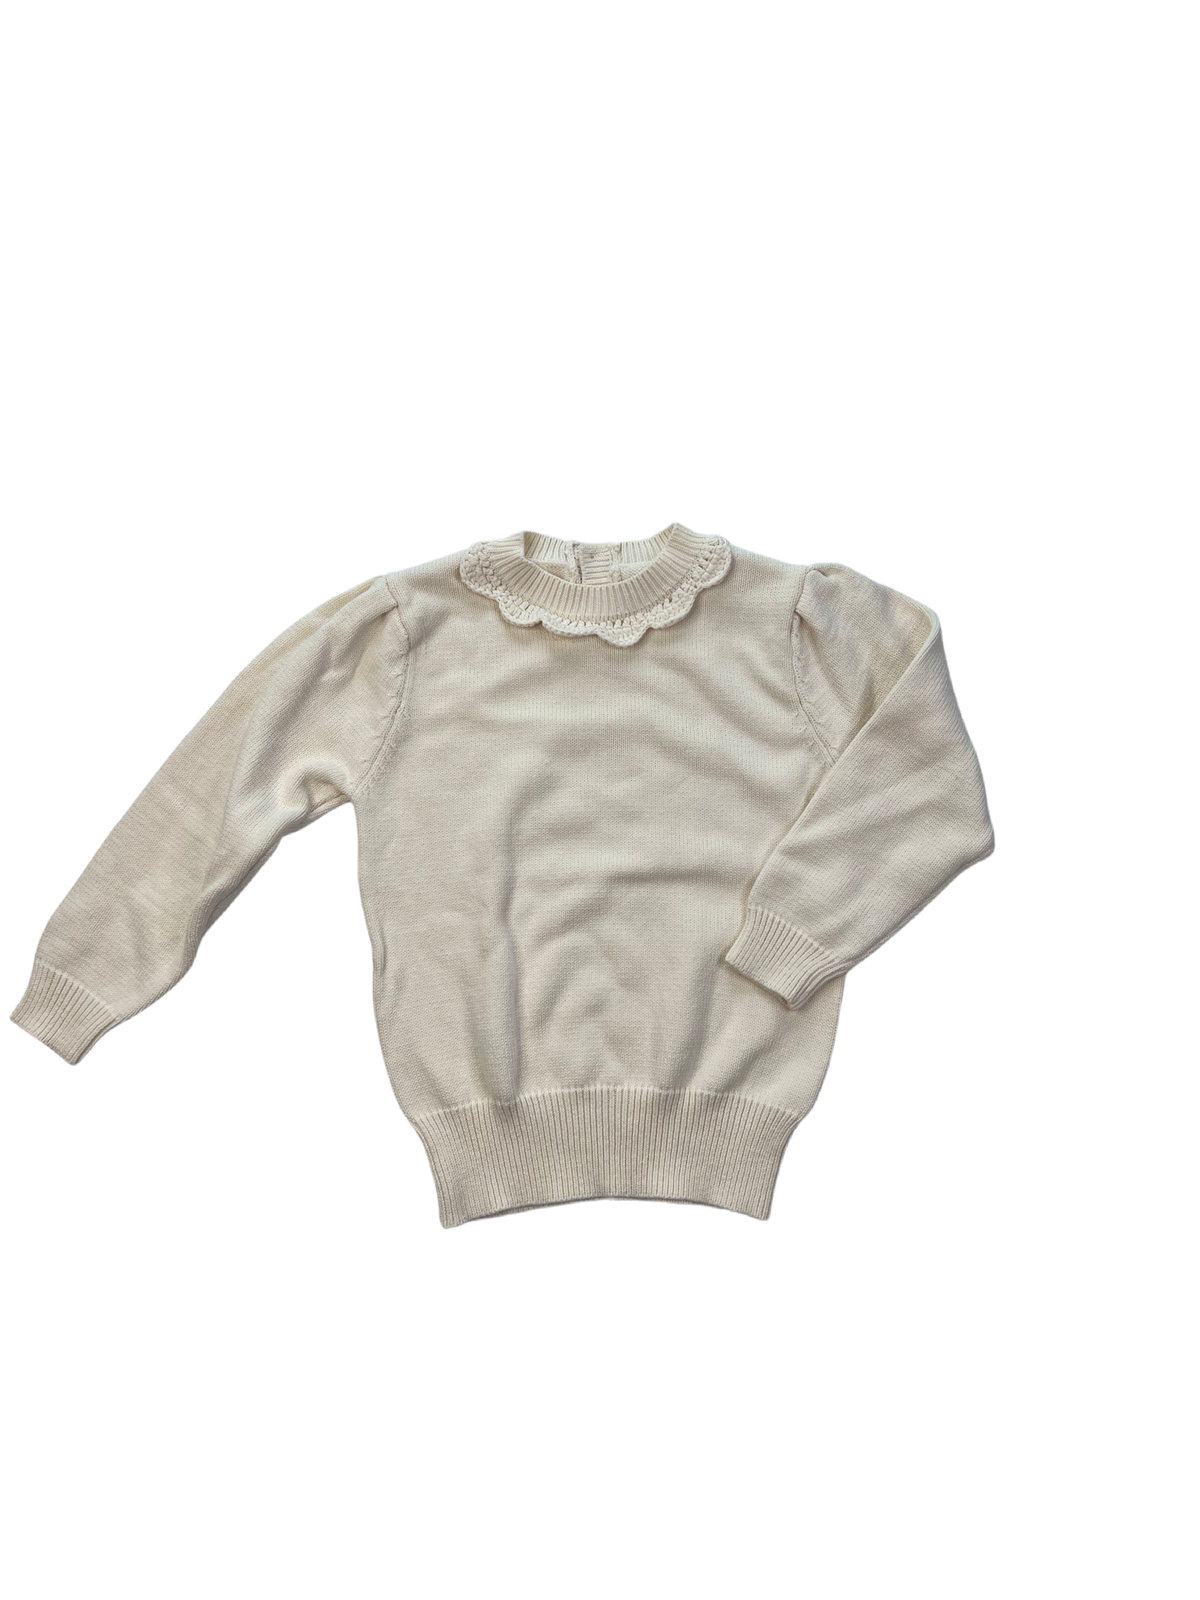 Knit Sweater| Size 5/6Y| |  Ivory  | New